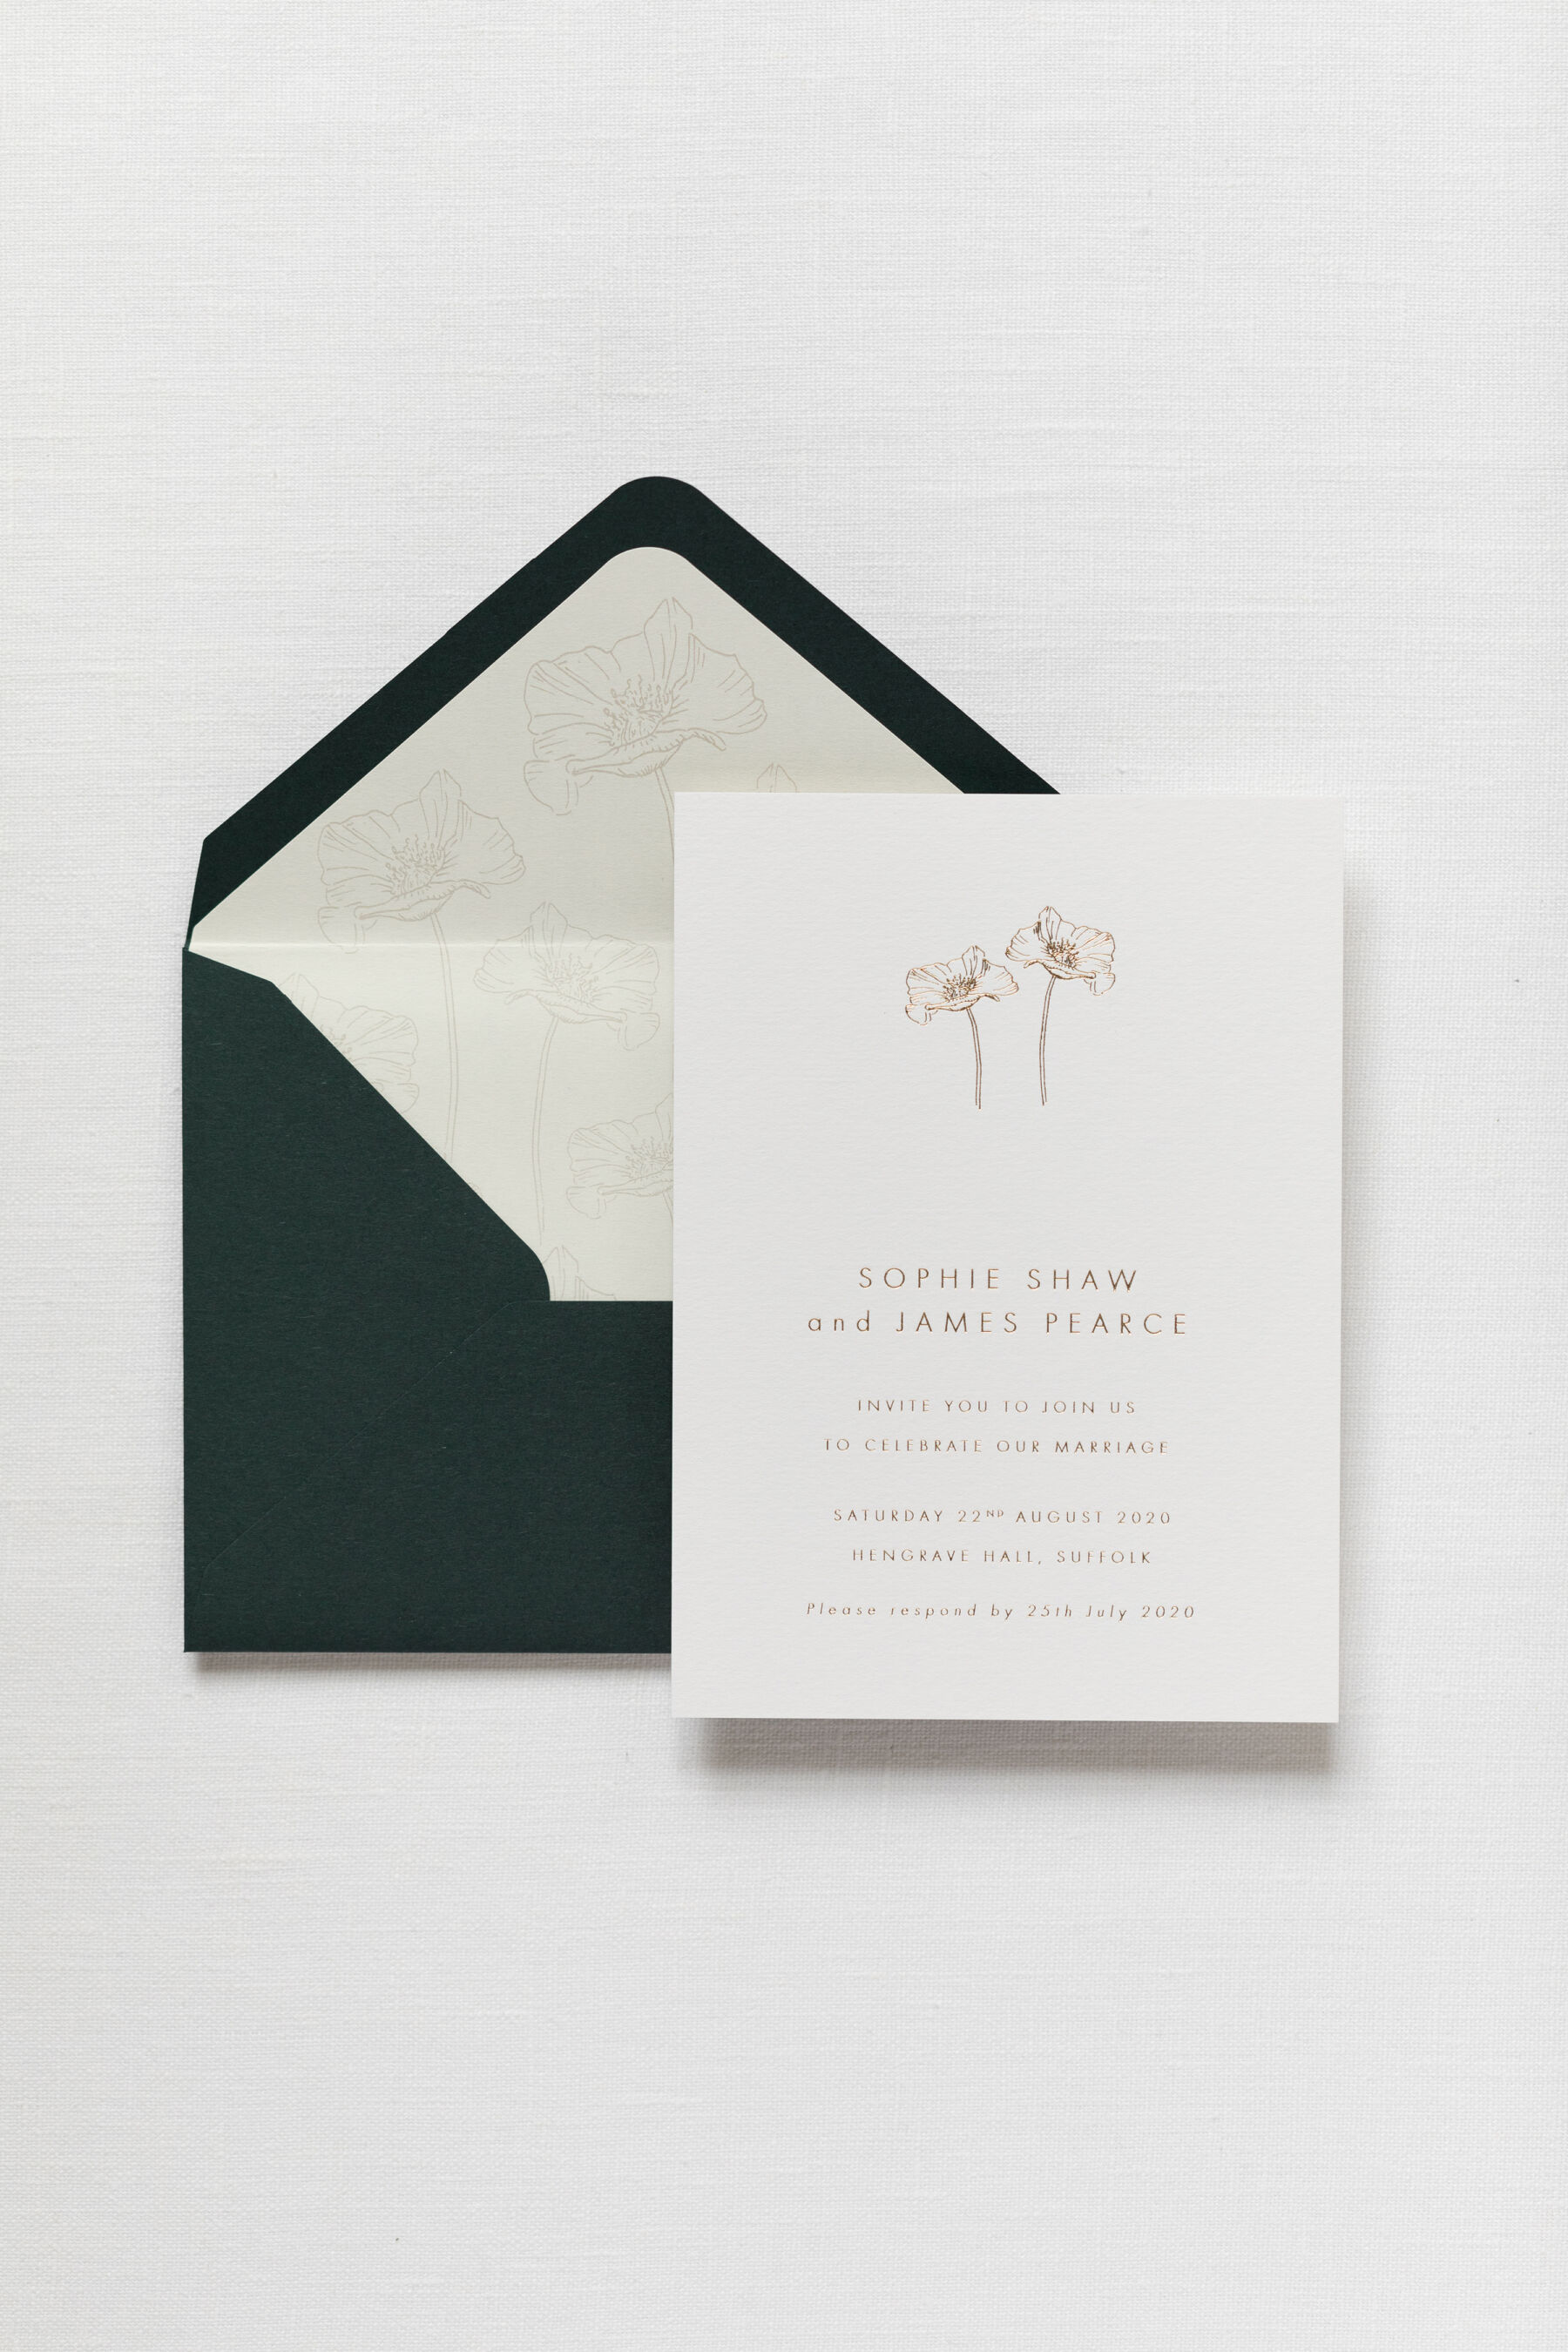 Hot foil printed wedding invitations with coordinating lined envelopes.